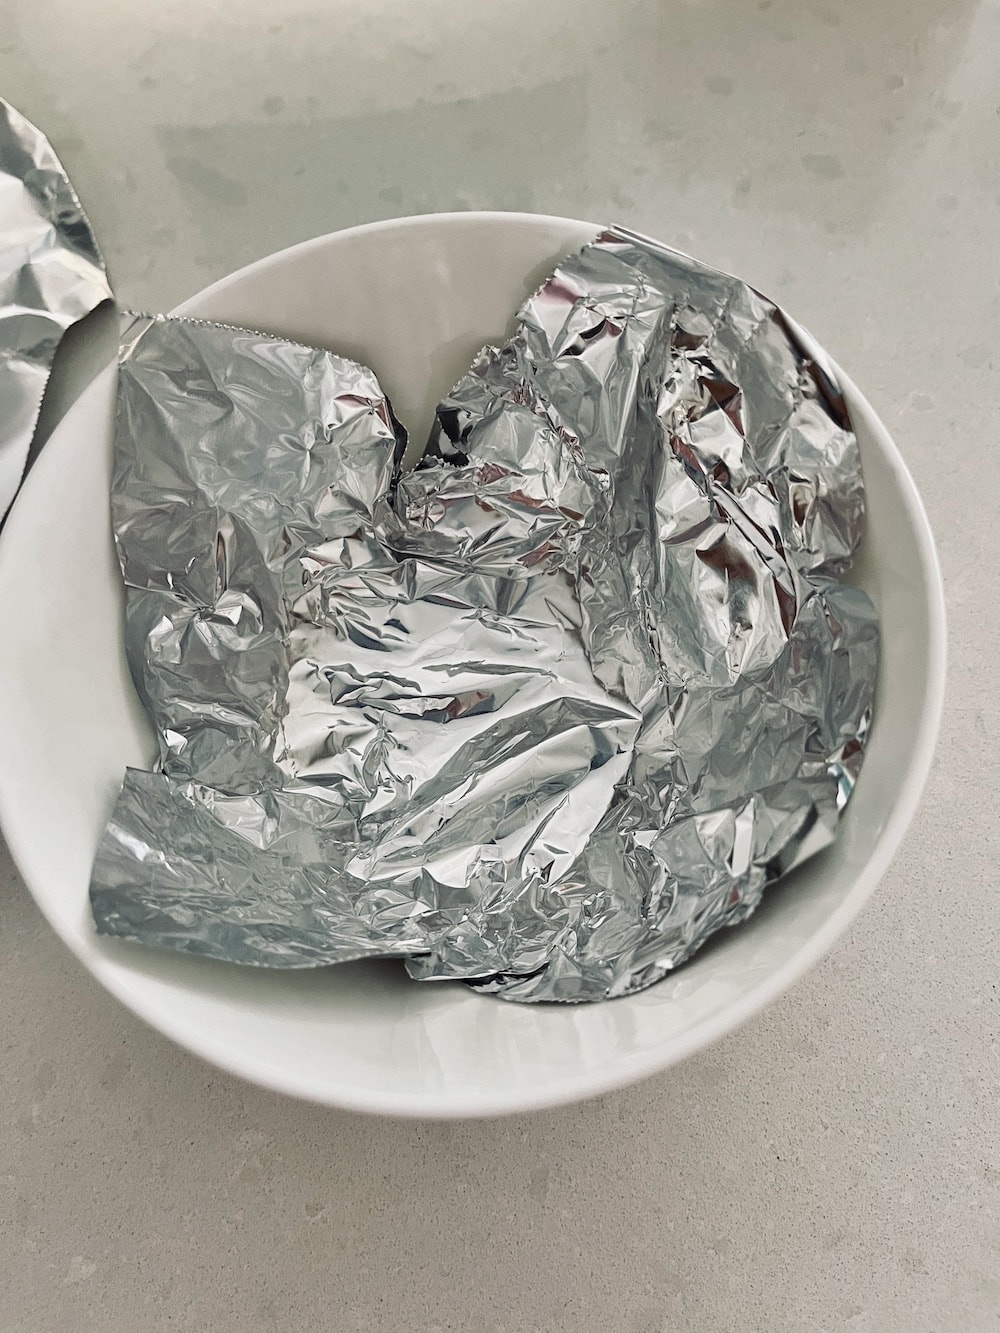 aluminum foil added to bowl